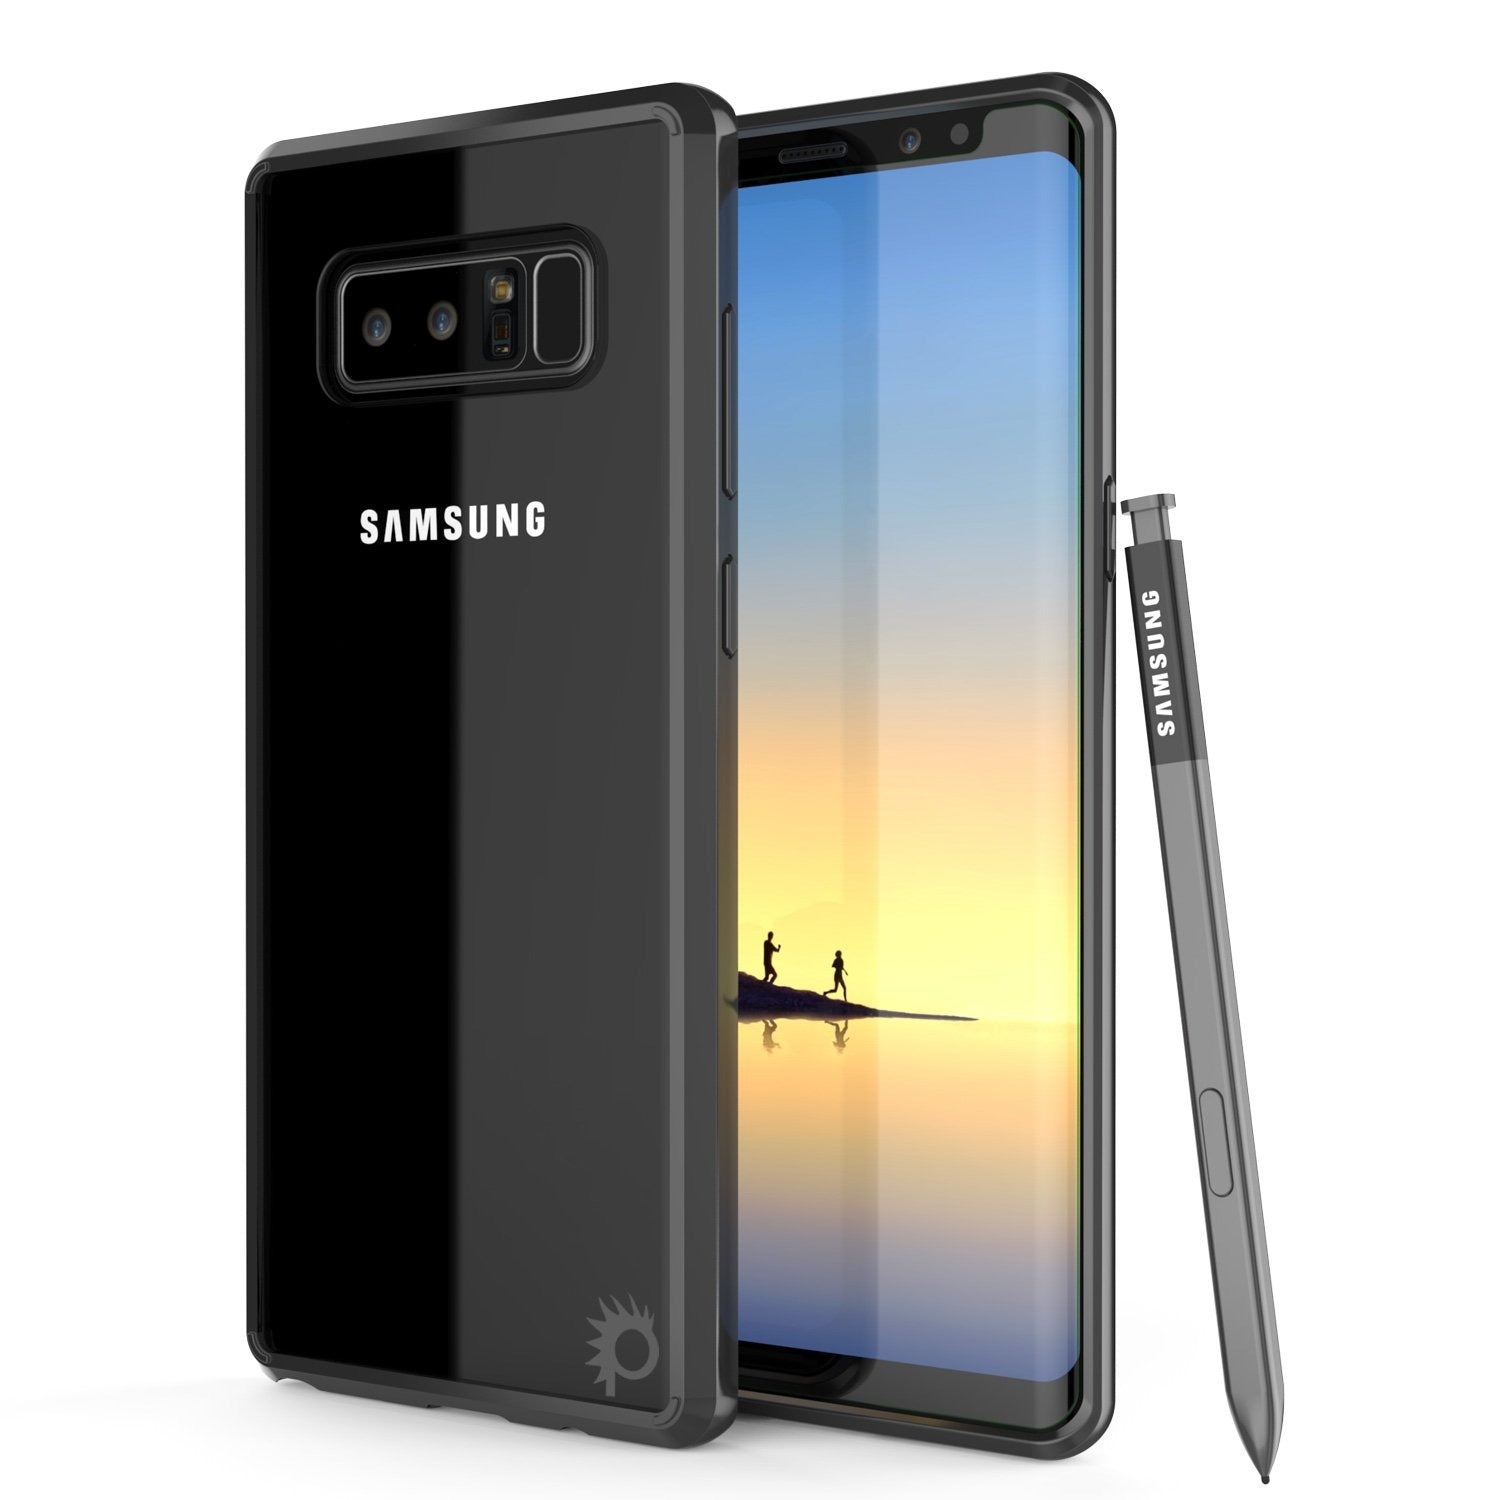 Galaxy Note 8 Punkcase, LUCID 2.0 Series Armor Cover, [Black]